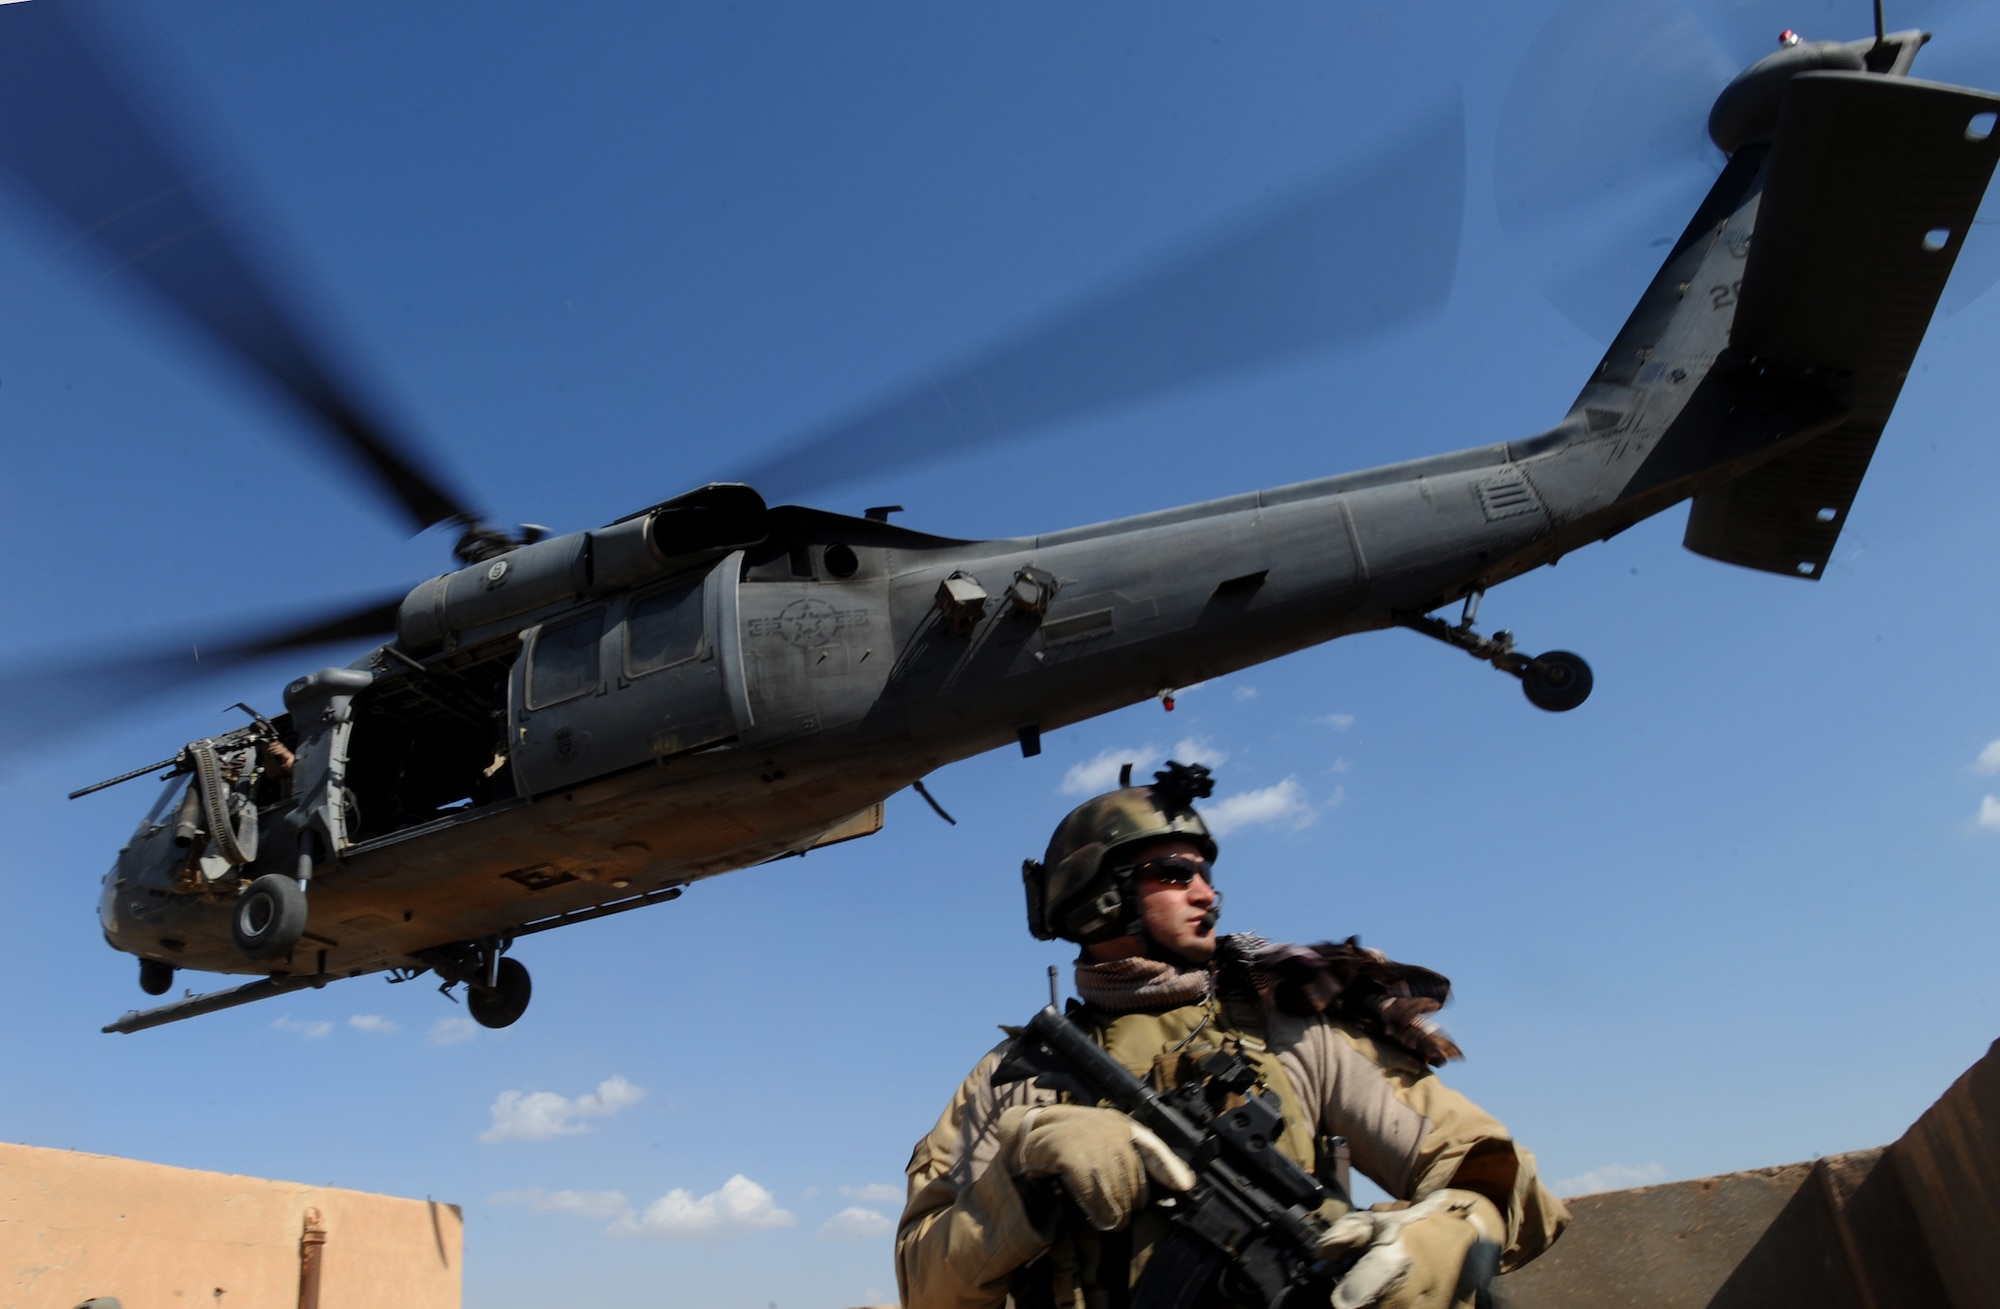 U.S. Air Force Pararescueman Staff Sgt. Ivan Eggel, 64th Expeditionary Rescue Squadron, Joint Base Balad, Iraq, conducts security for an HH-60 Pavehawk helicopter during a proficiency exercise April 10, 2009, in support of Operation Iraqi Freedom.  (U.S. Air Force photo by Staff Sgt. James L. Harper Jr.)